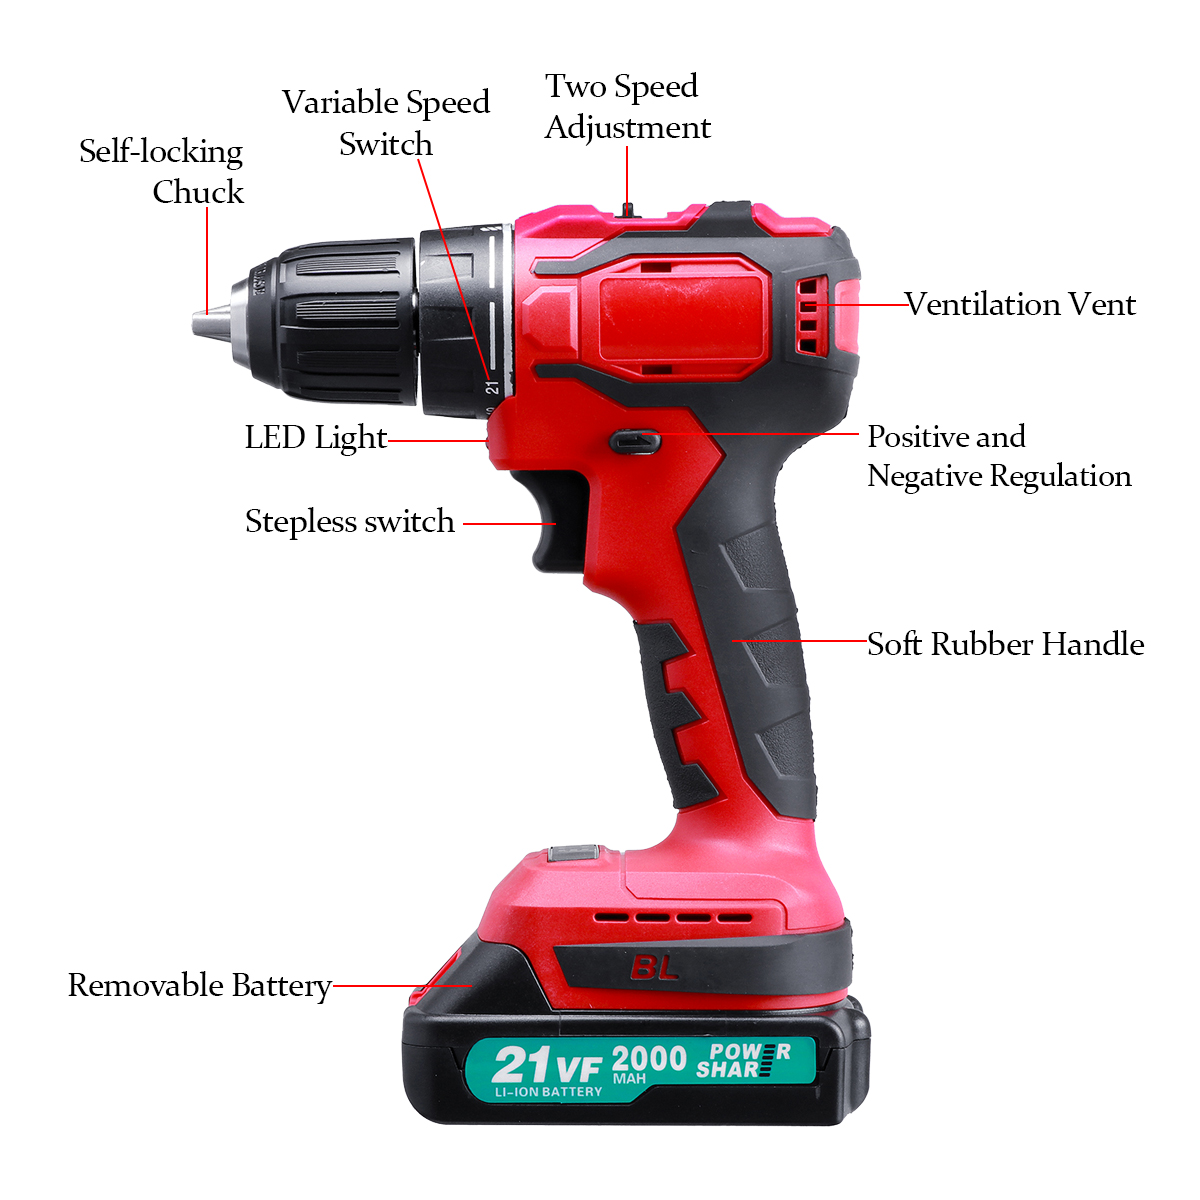 2000mAh-211NM-LED-Cordless-Electric-Drill-2-Speeds-Impact-Drill-W-None1pc2pcs-Battery-1785619-10